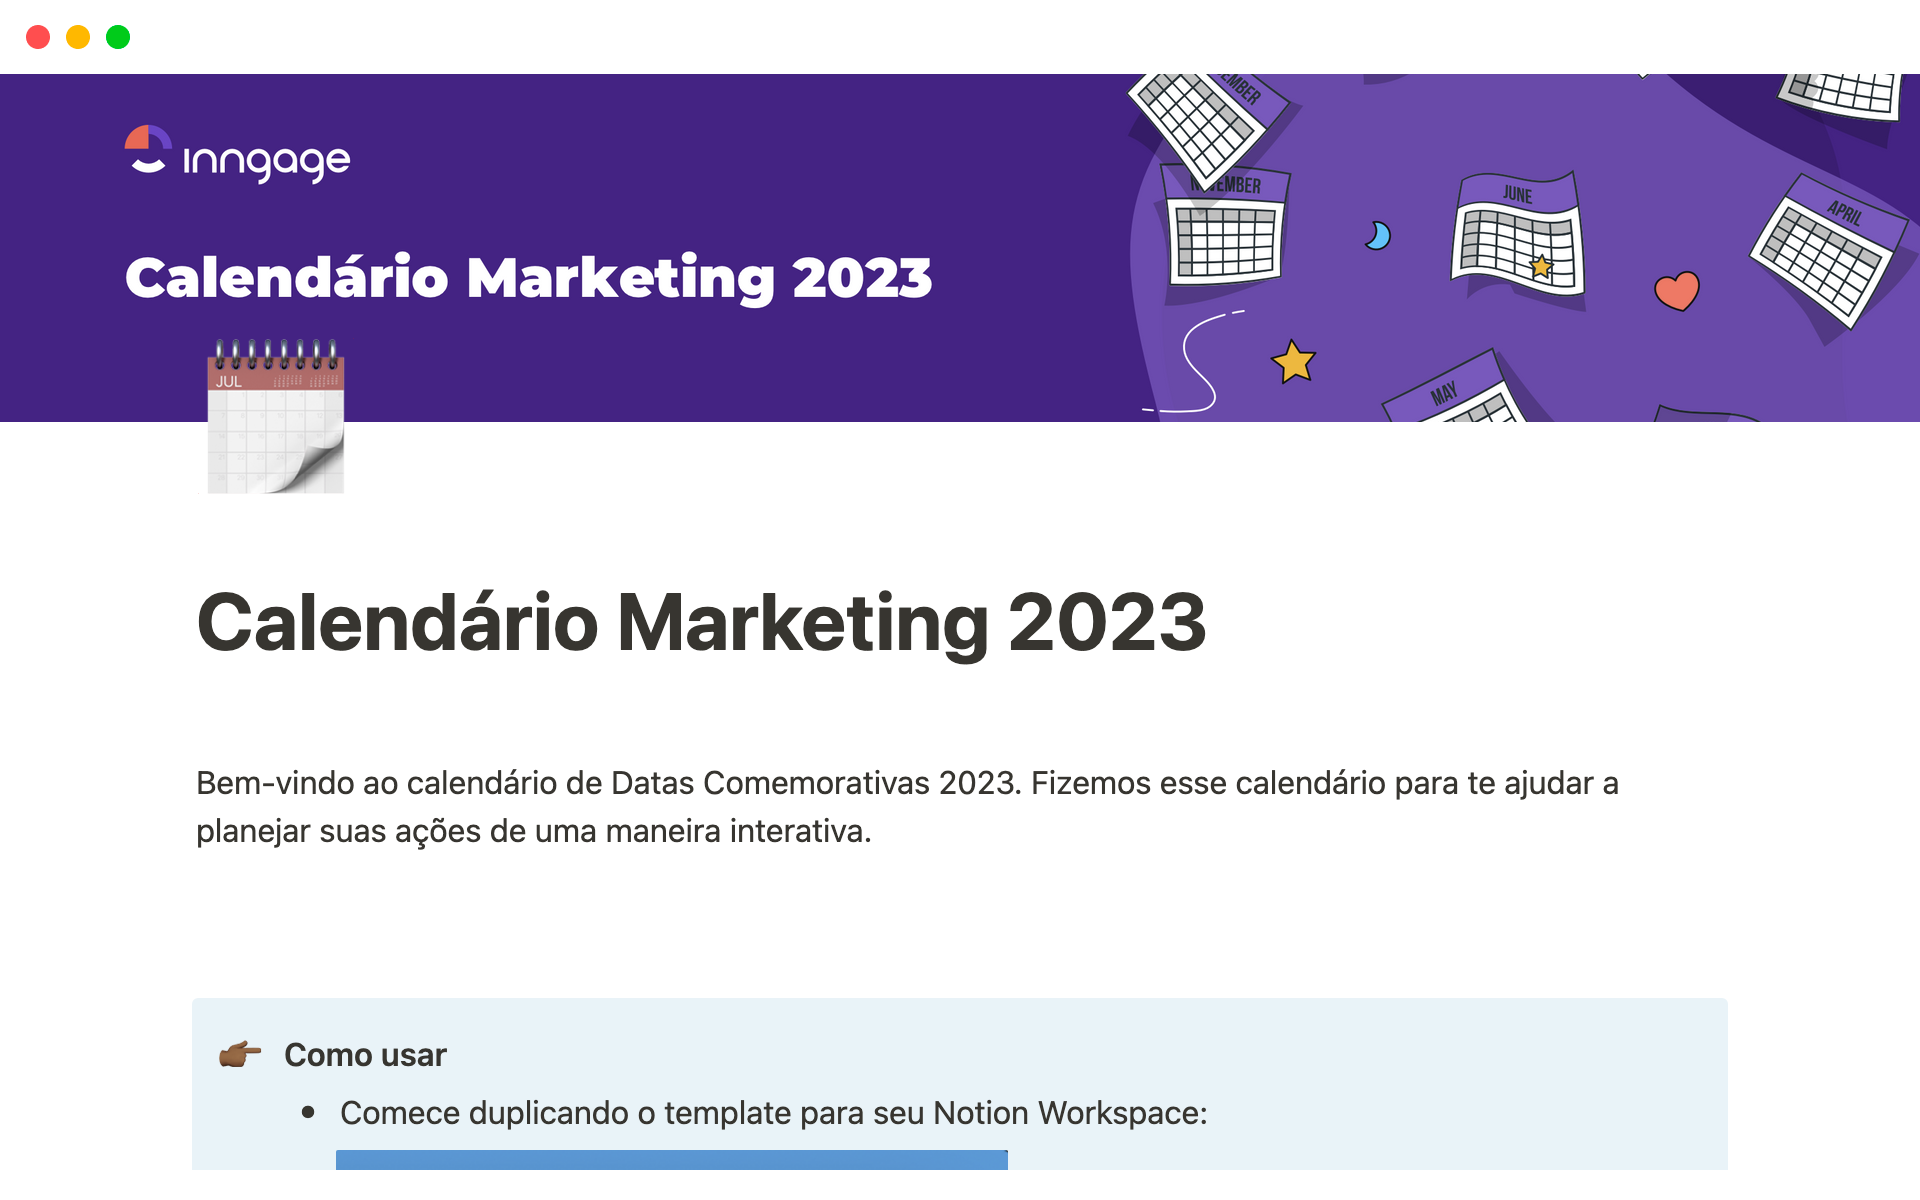 This template is a annual Special Dates must have for Brazilian Markerter. It compiles in a easy Notion view the most importants dates for brazilian marketers, so they can plan their campaigns.